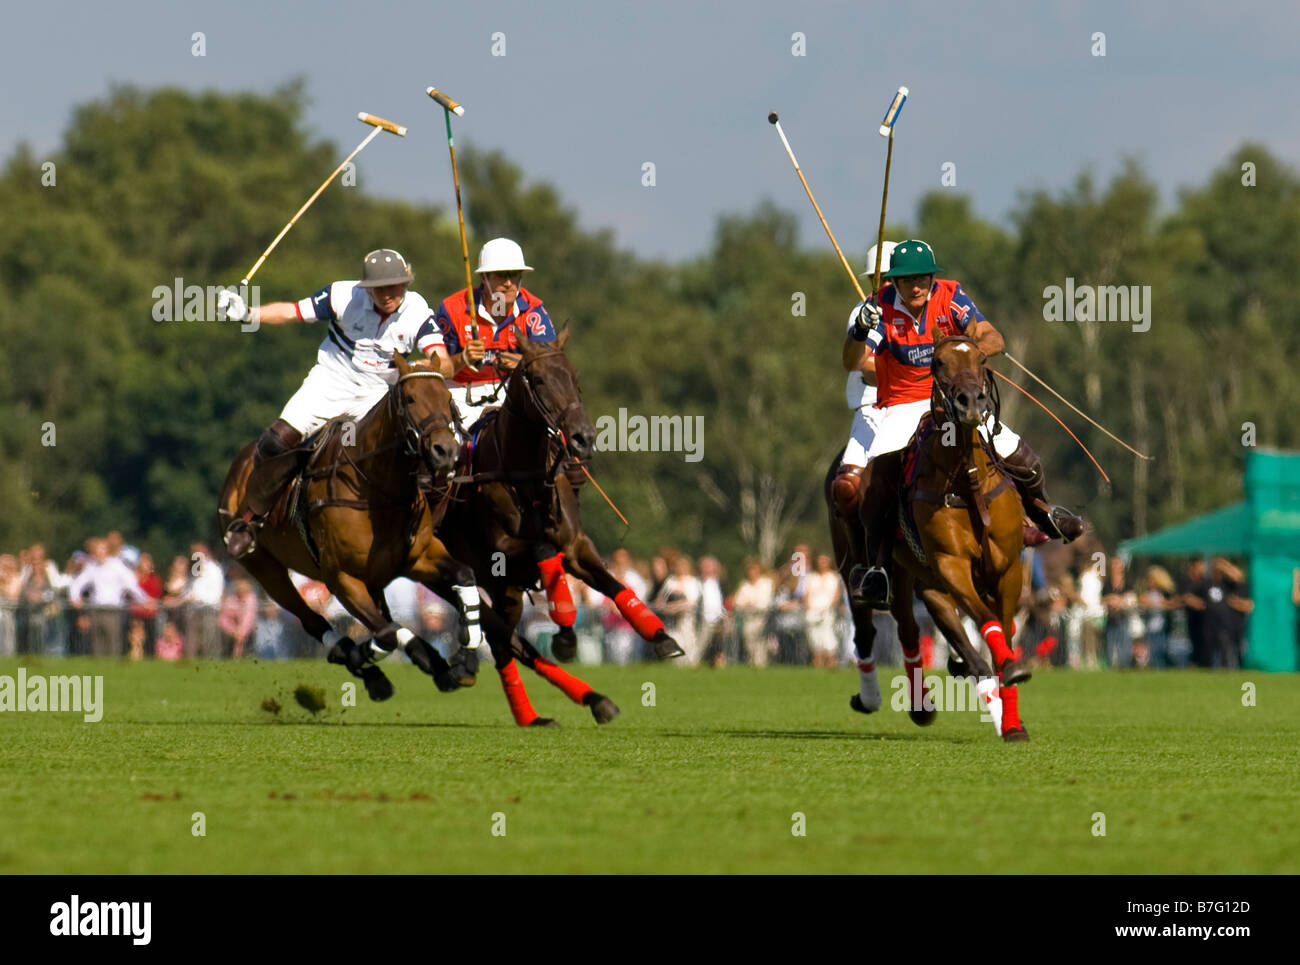 Polo match at Cartier Polo Day, Smith's Lawn, Windsor Great Park Egham Surrey UK Stock Photo